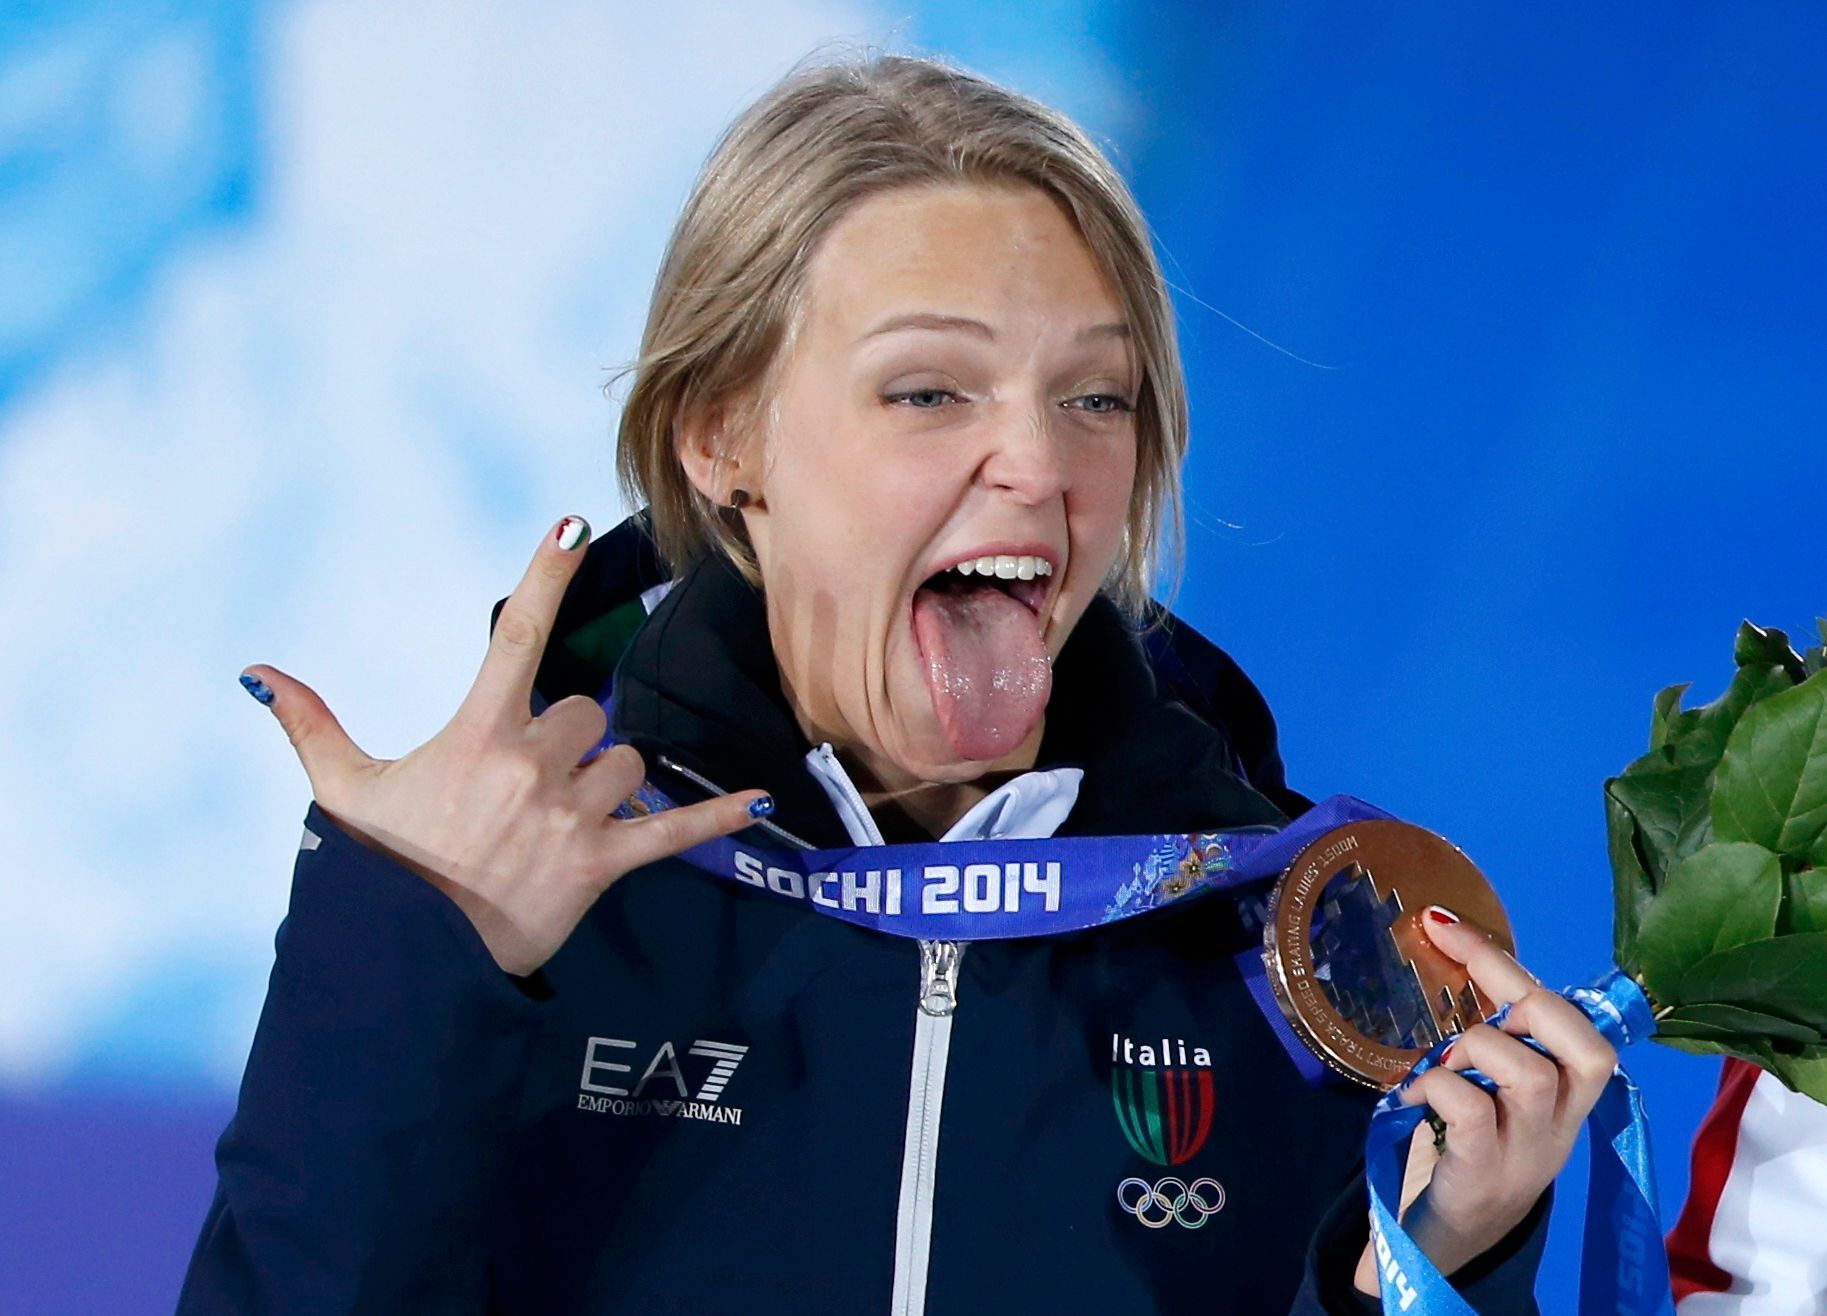 Fontana celebrates during the victory ceremony for the women's 1,500 metres short track speed skating event at the 2014 Sochi Winter Olympics in Sochi